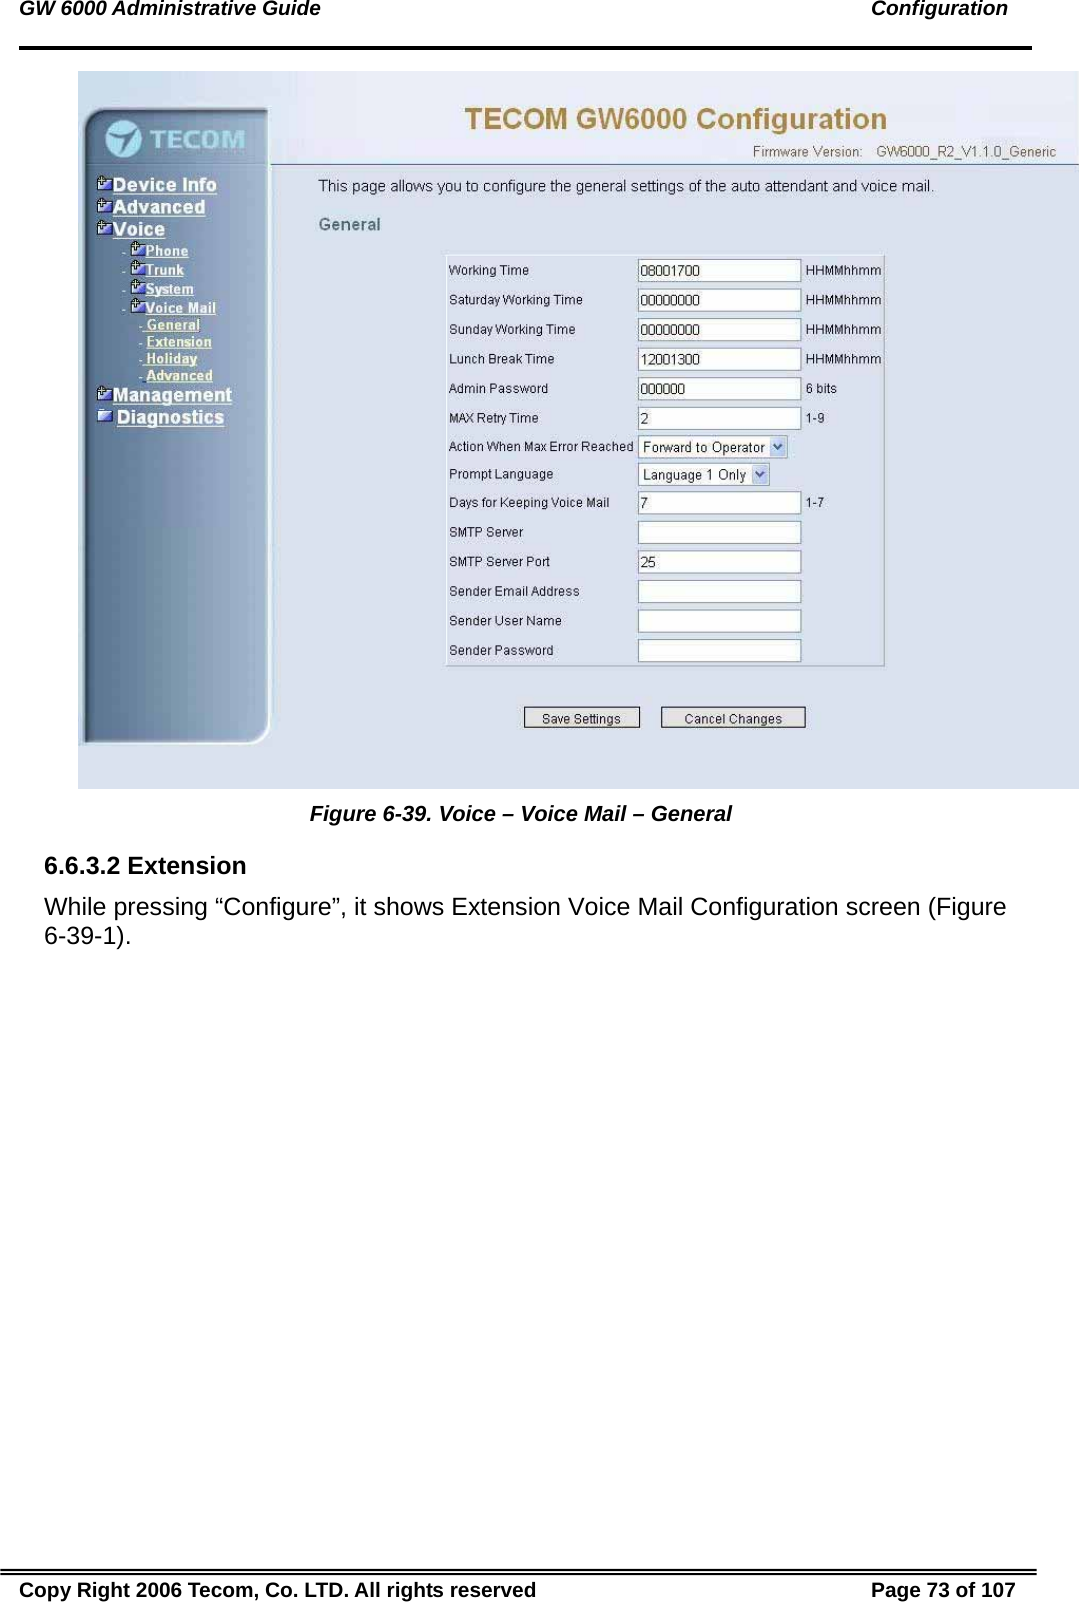 GW 6000 Administrative Guide                                                                                               Configuration  Figure 6-39. Voice – Voice Mail – General 6.6.3.2 Extension While pressing “Configure”, it shows Extension Voice Mail Configuration screen (Figure 6-39-1). Copy Right 2006 Tecom, Co. LTD. All rights reserved  Page 73 of 107 